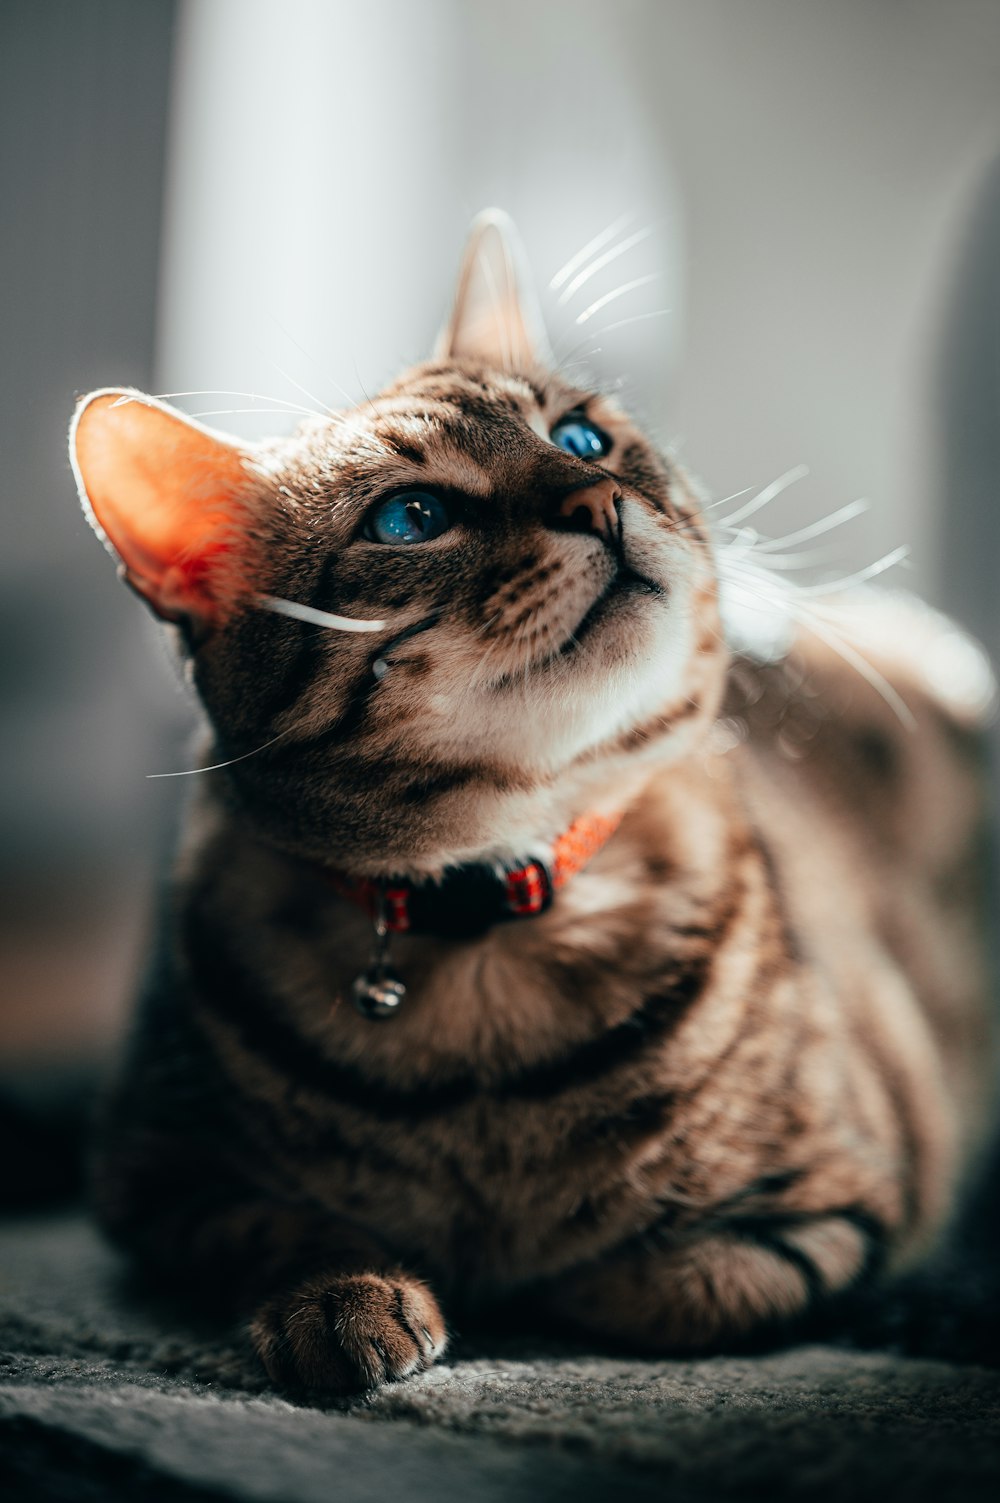 brown tabby cat with red collar photo – Free 8518 Image on Unsplash